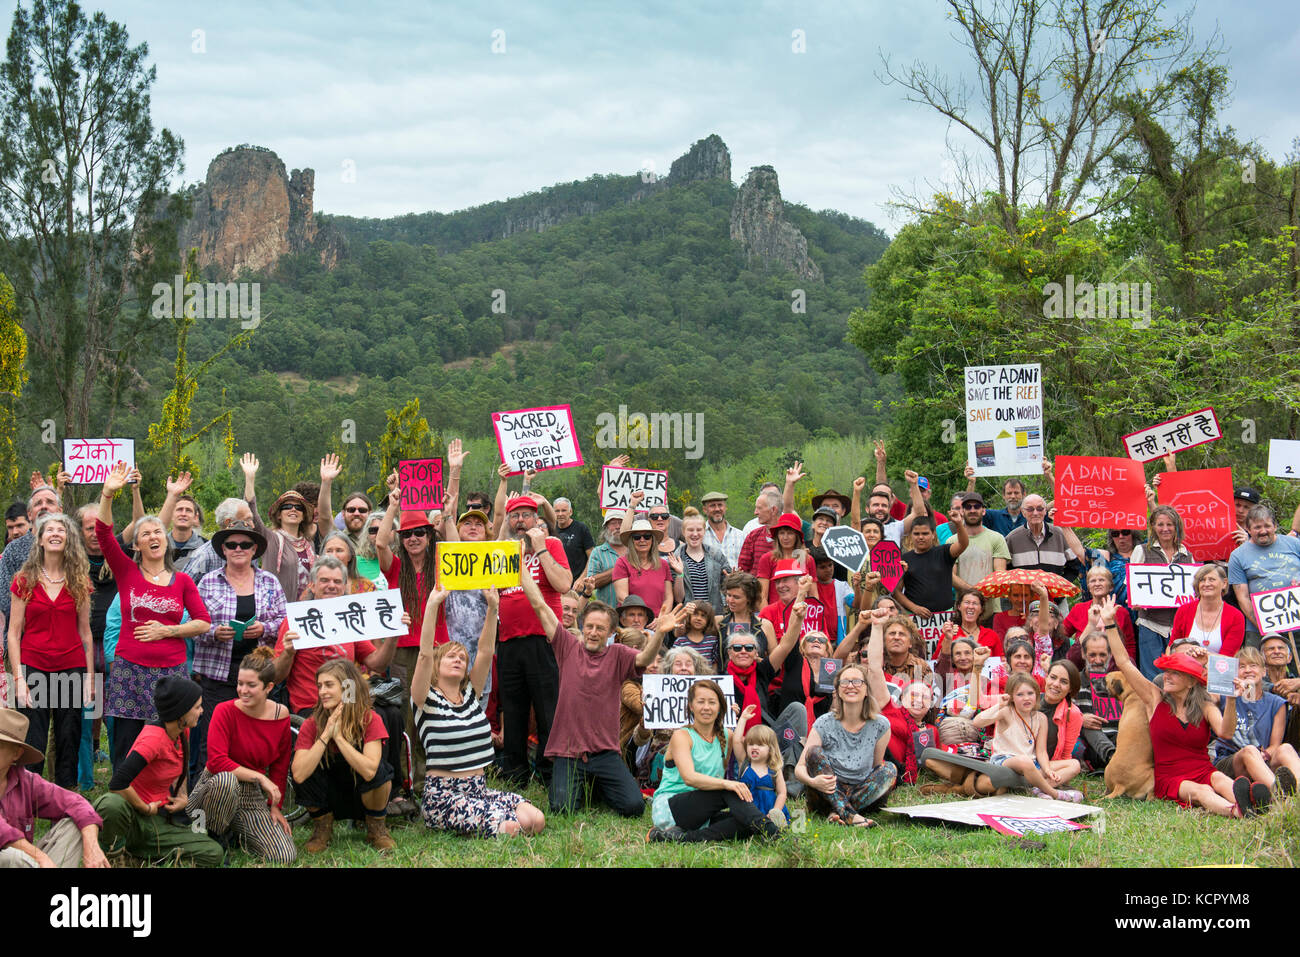 Nimbin, Australia. 7th October, 2017. Protesters against coal and Adani's Queensland Carmichael coal mine pose for photos in front of the sacred Nimbin Rocks. Credit: Peter Ptschelinzew/Alamy Live News. Stock Photo